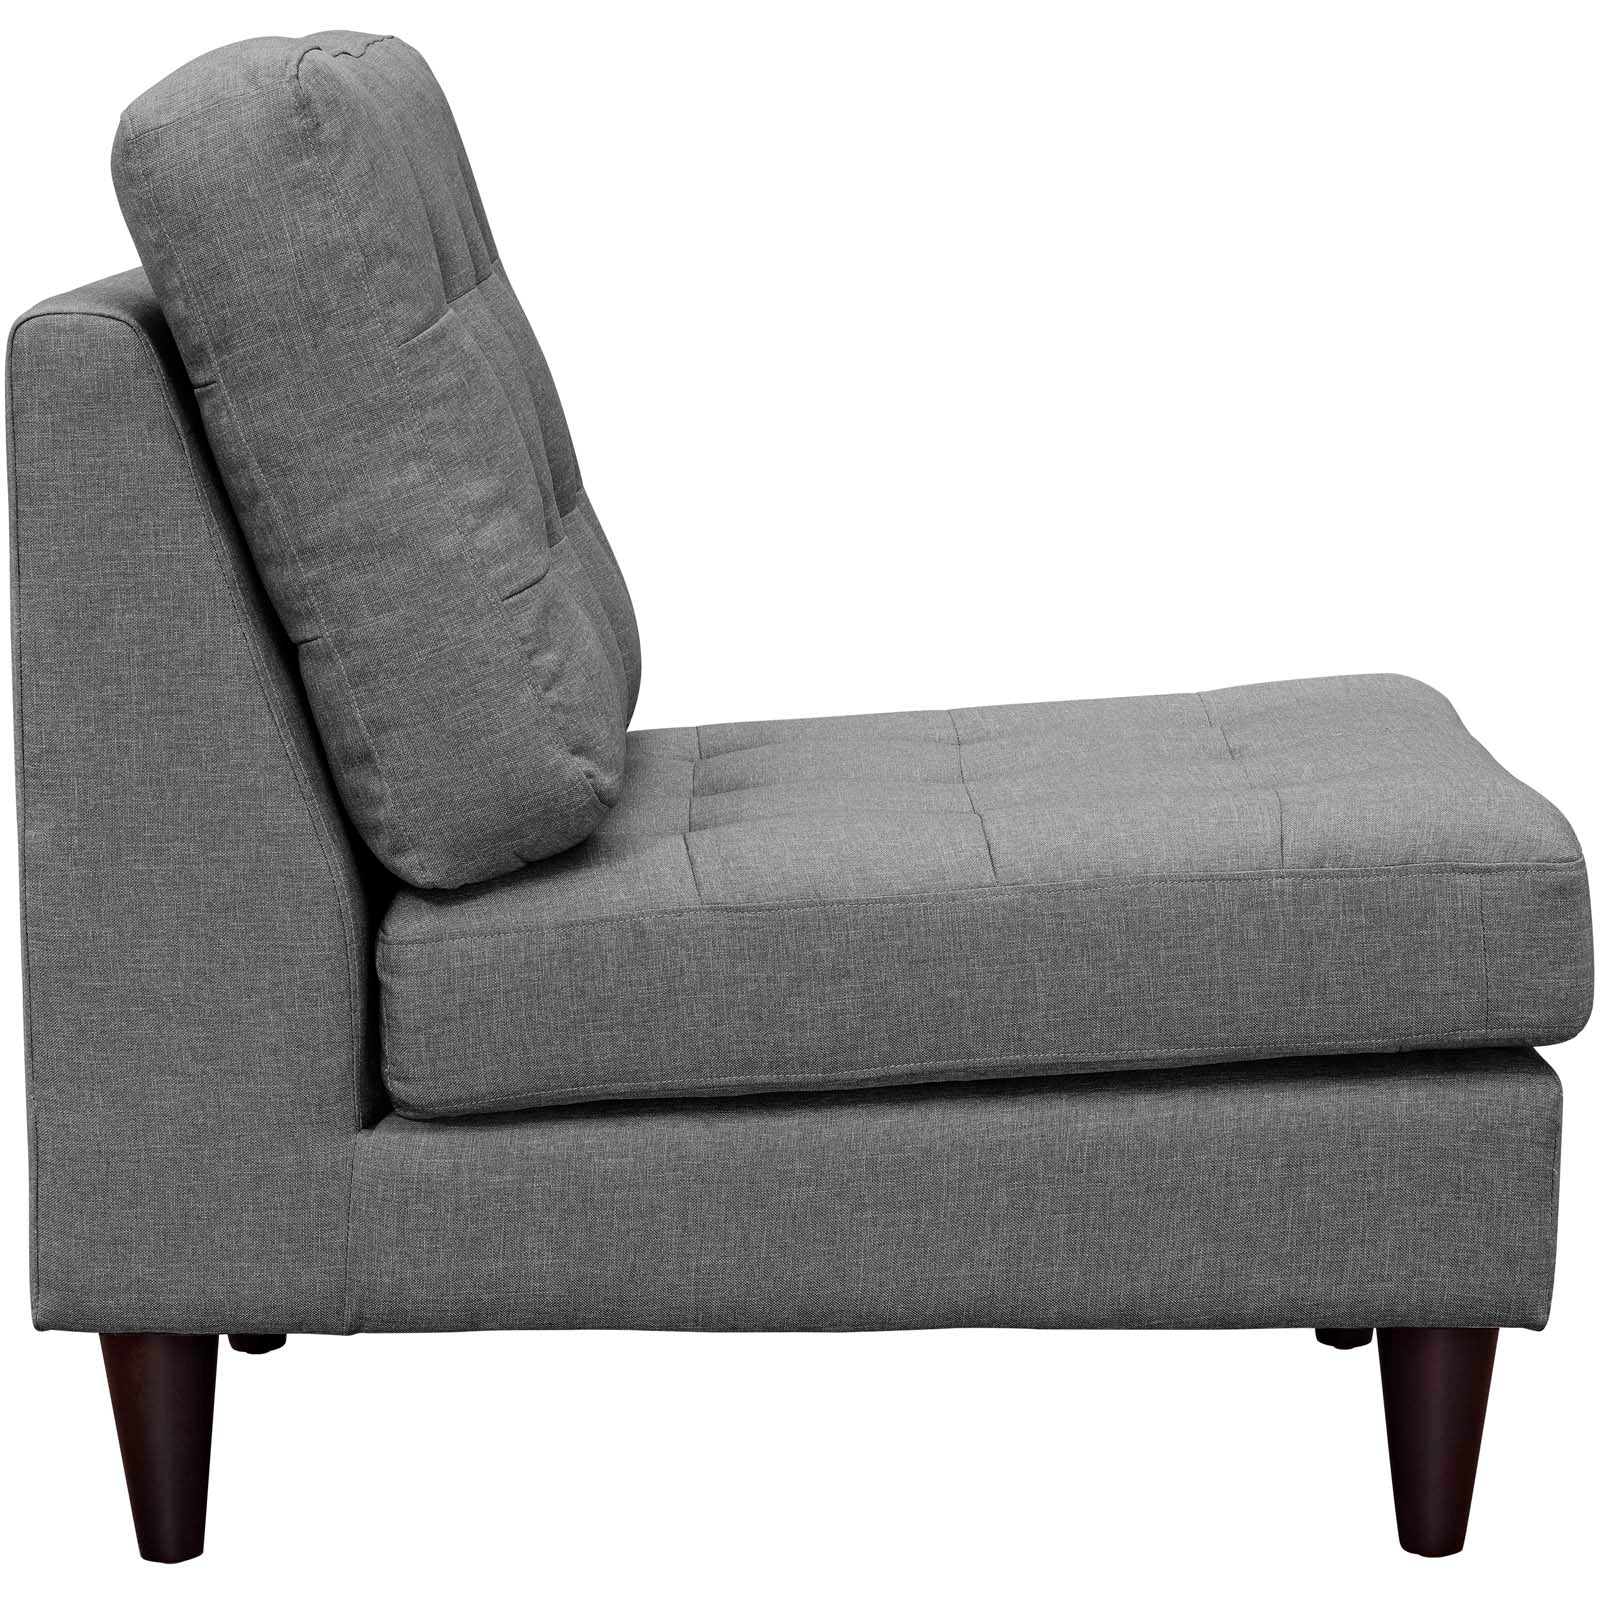 Modway Accent Chairs - Empress Upholstered Fabric Lounge Chair Gray